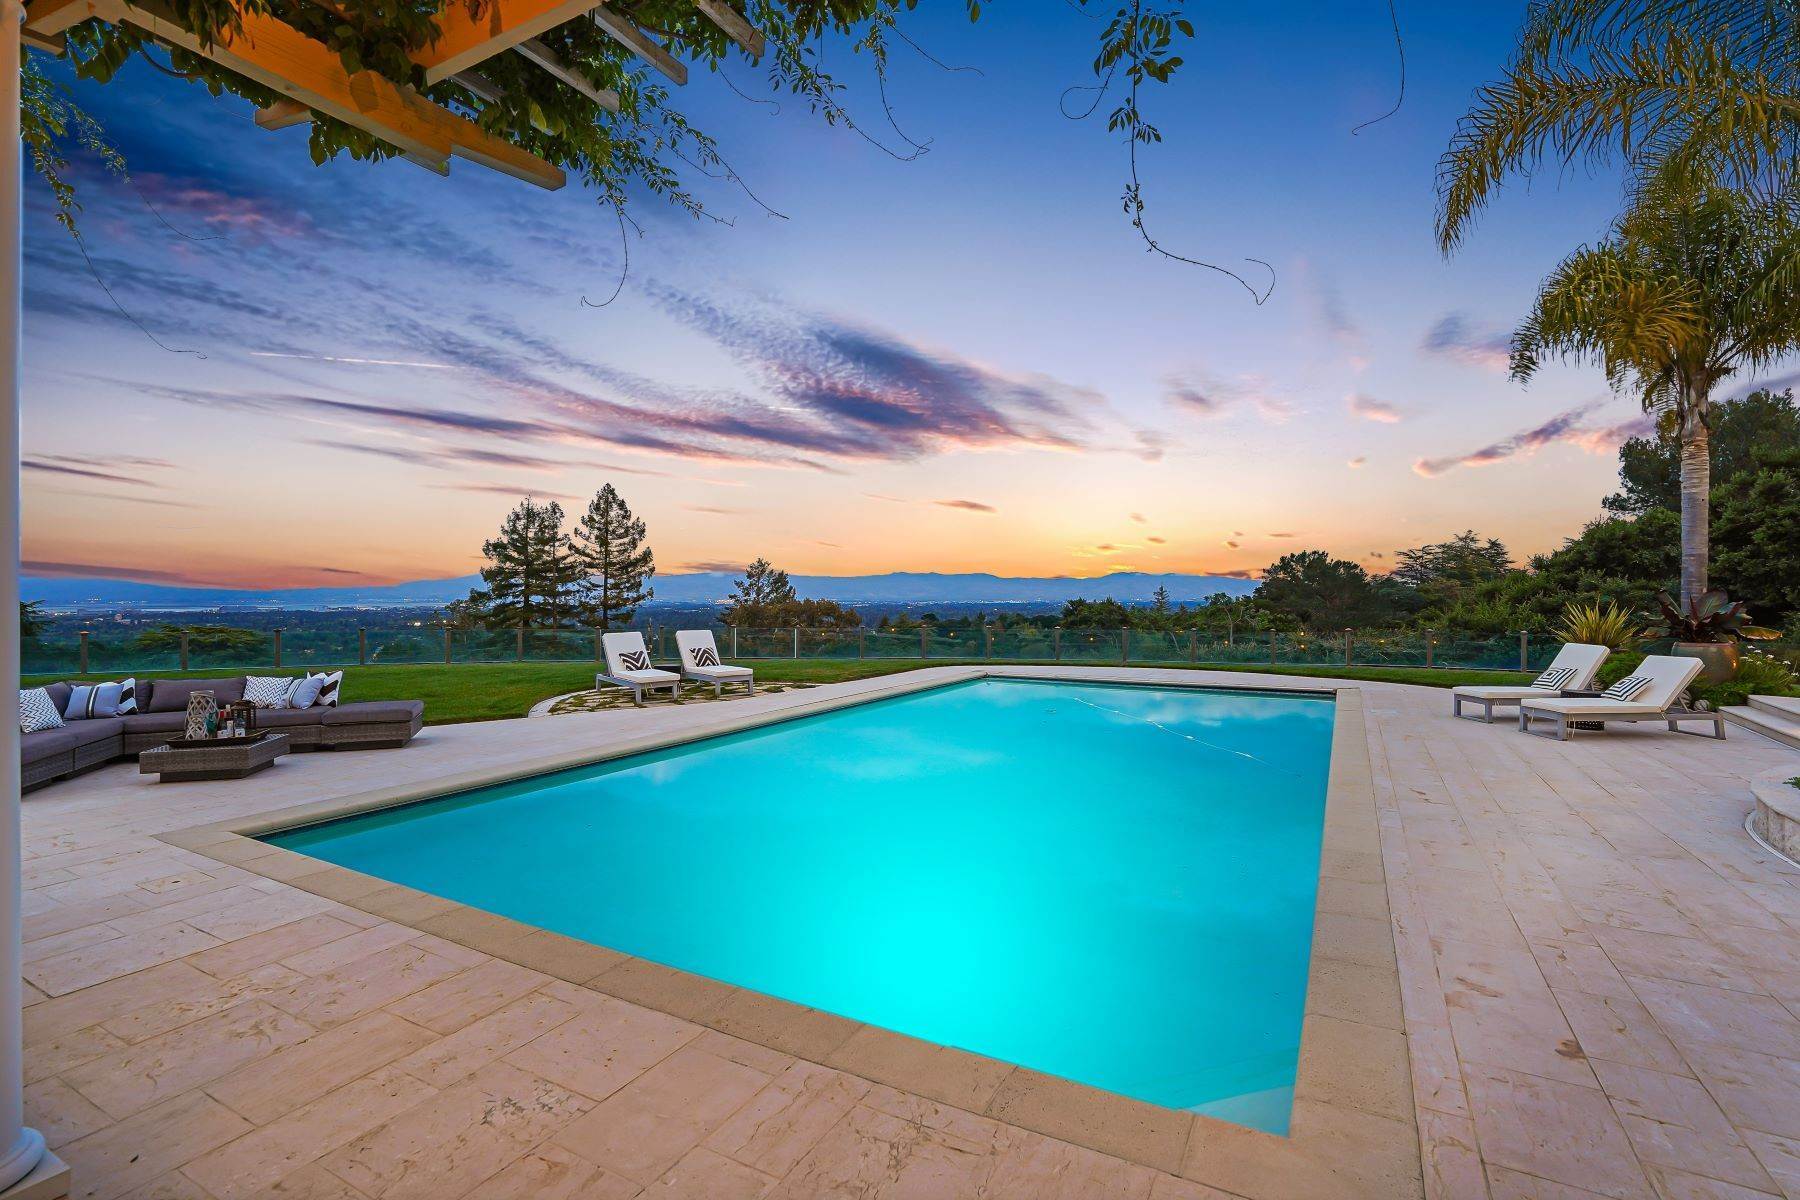 Single Family Homes for Sale at Spectacular Contemporary Home with Sweeping Bay Views 10560 Blandor Way Los Altos Hills, California 94024 United States